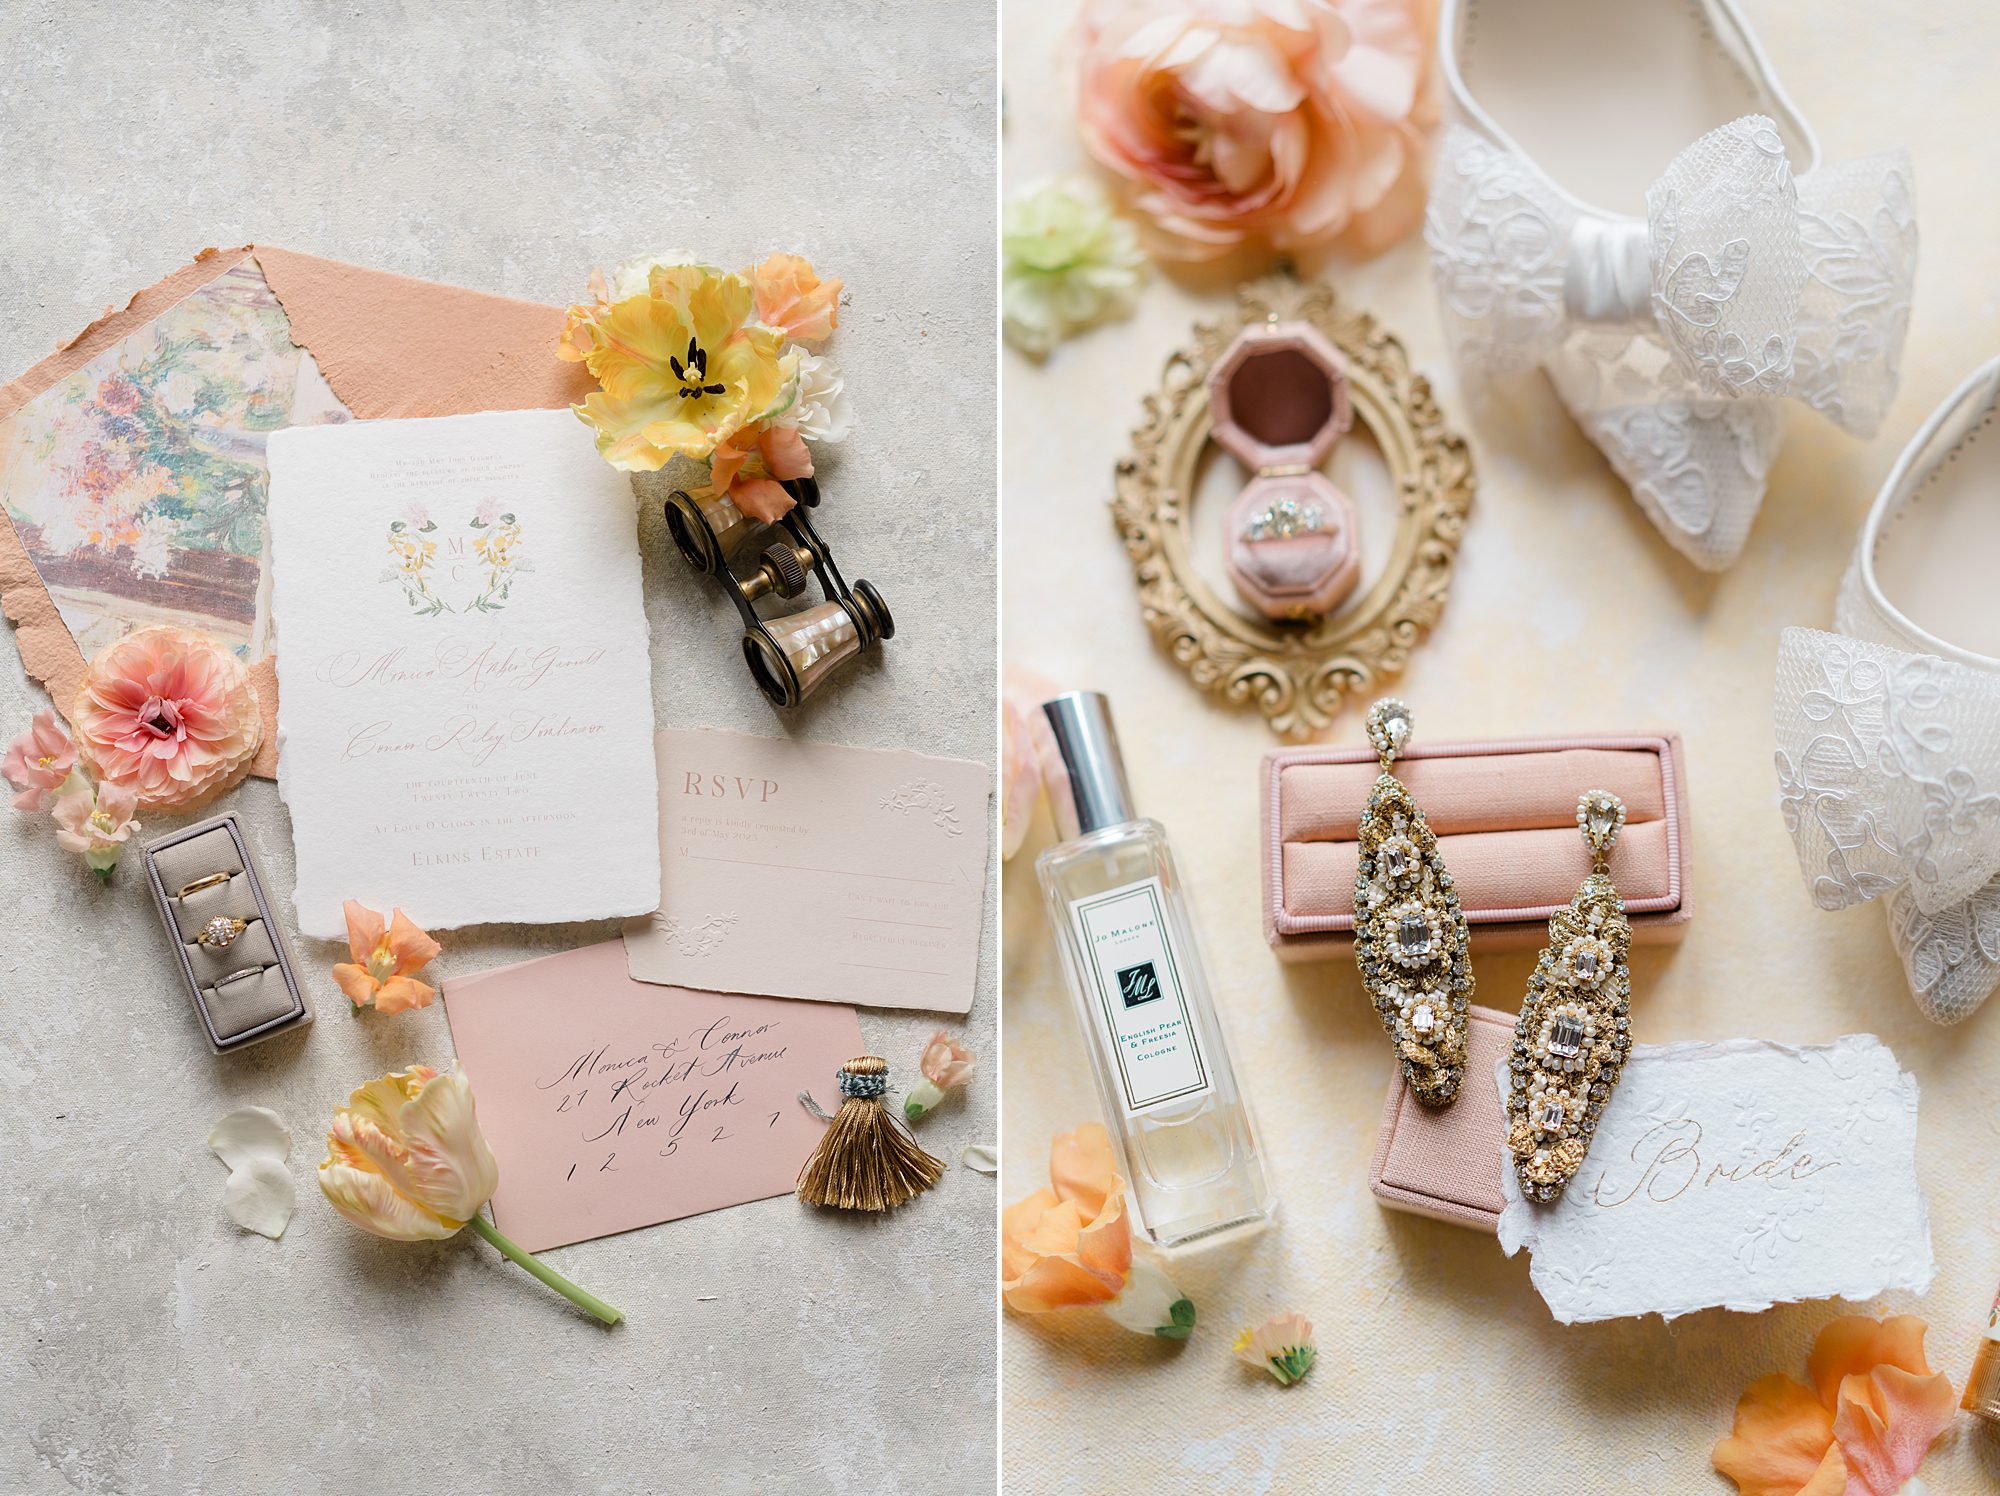 wedding invitations and bridal details from Elstowe Manor Bridal Shoot at Elkins Estate